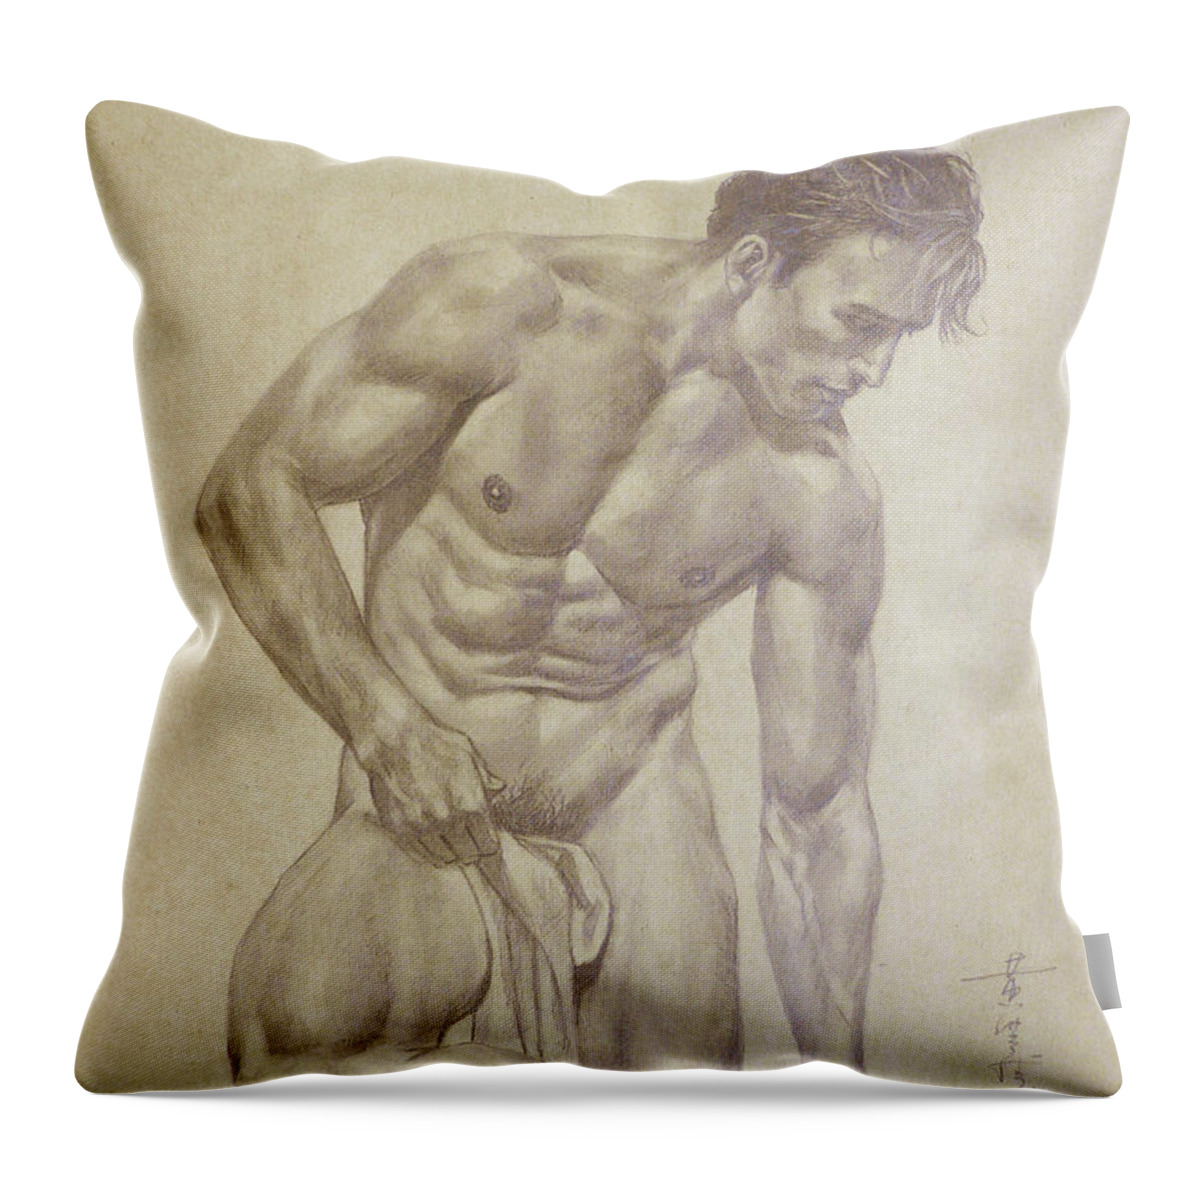 Original Art Throw Pillow featuring the drawing Original Artwork Pencil Drawing Male Nude Man On Paper#16-6-16-06 by Hongtao Huang